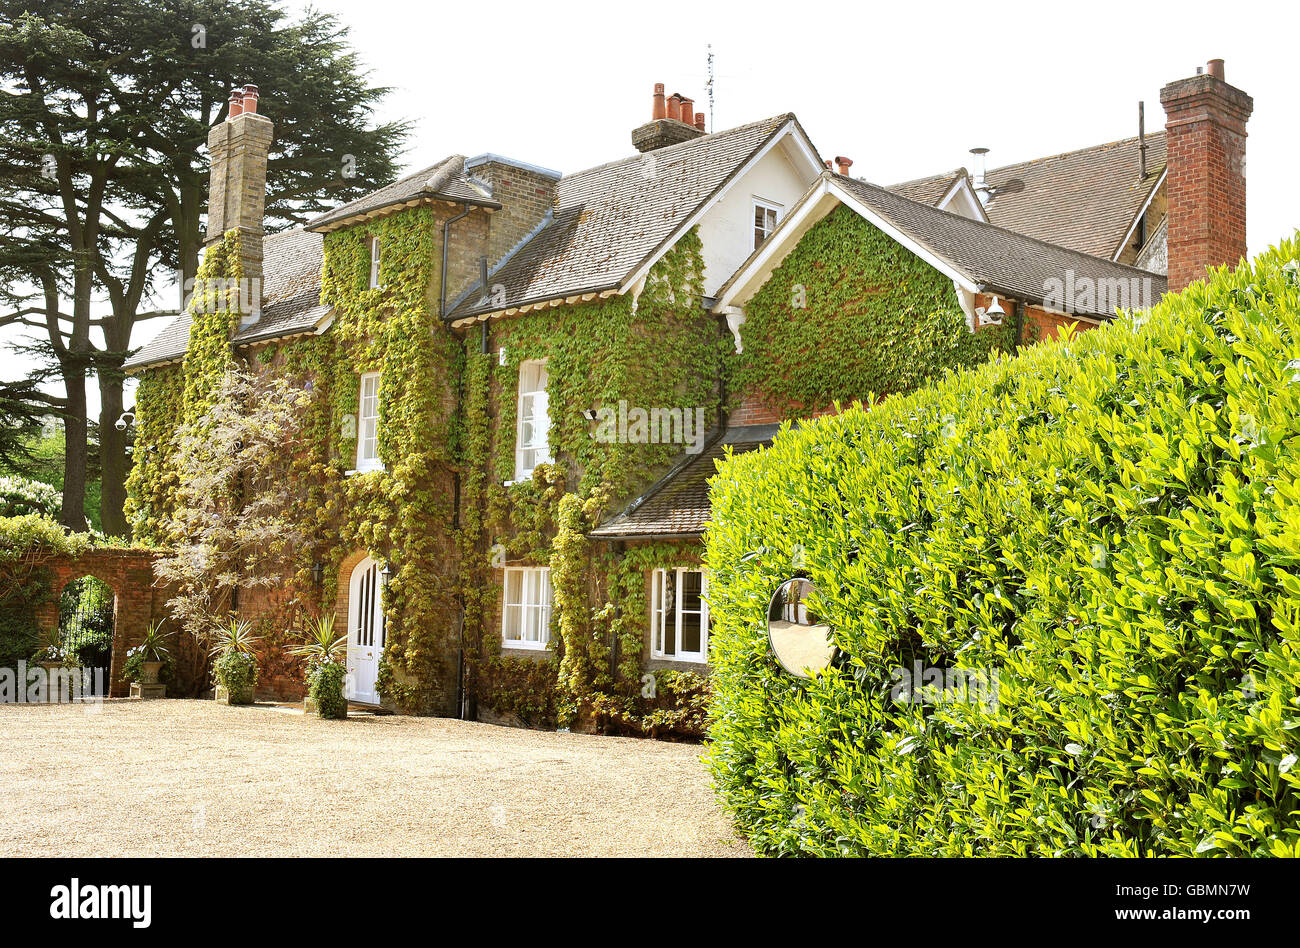 The Old Rectory, Ken and Barbara Follett's country home in Knebworth near Stevenage, Hertfordshire. Stock Photo